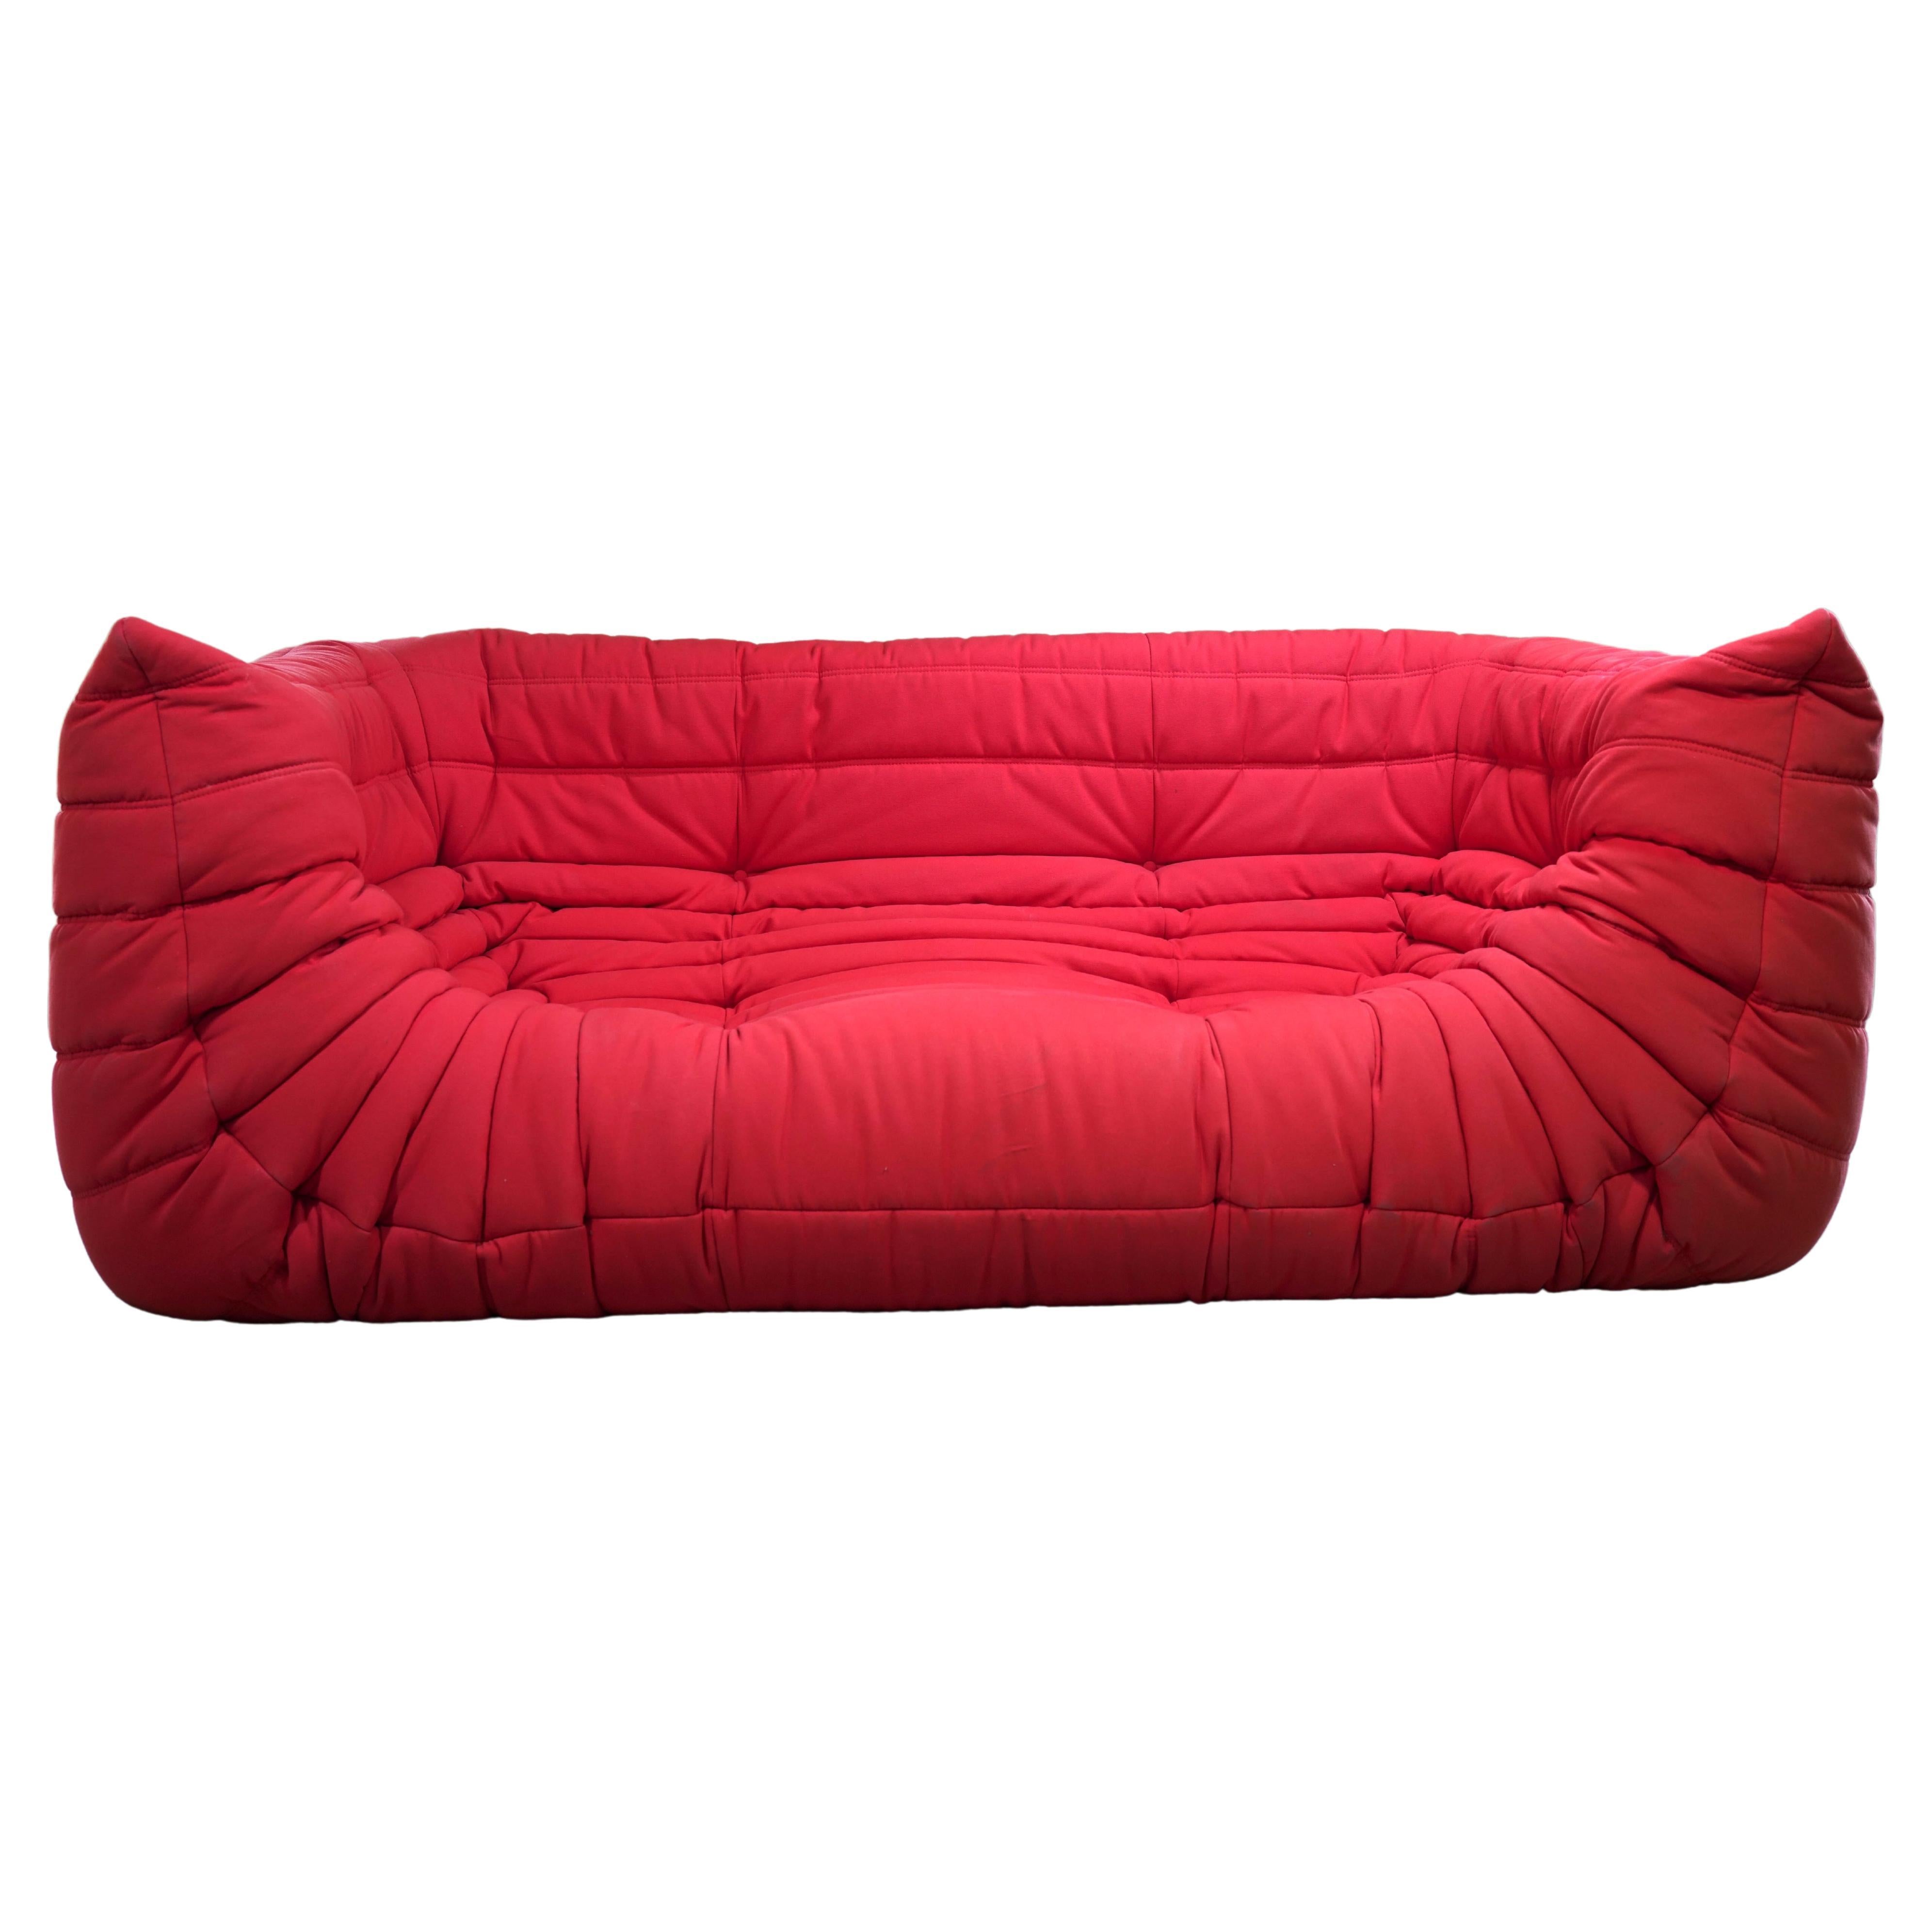 Red Alcantara Three-Seater Togo Sofa with Arms by Ligne Roset, 2006 For Sale